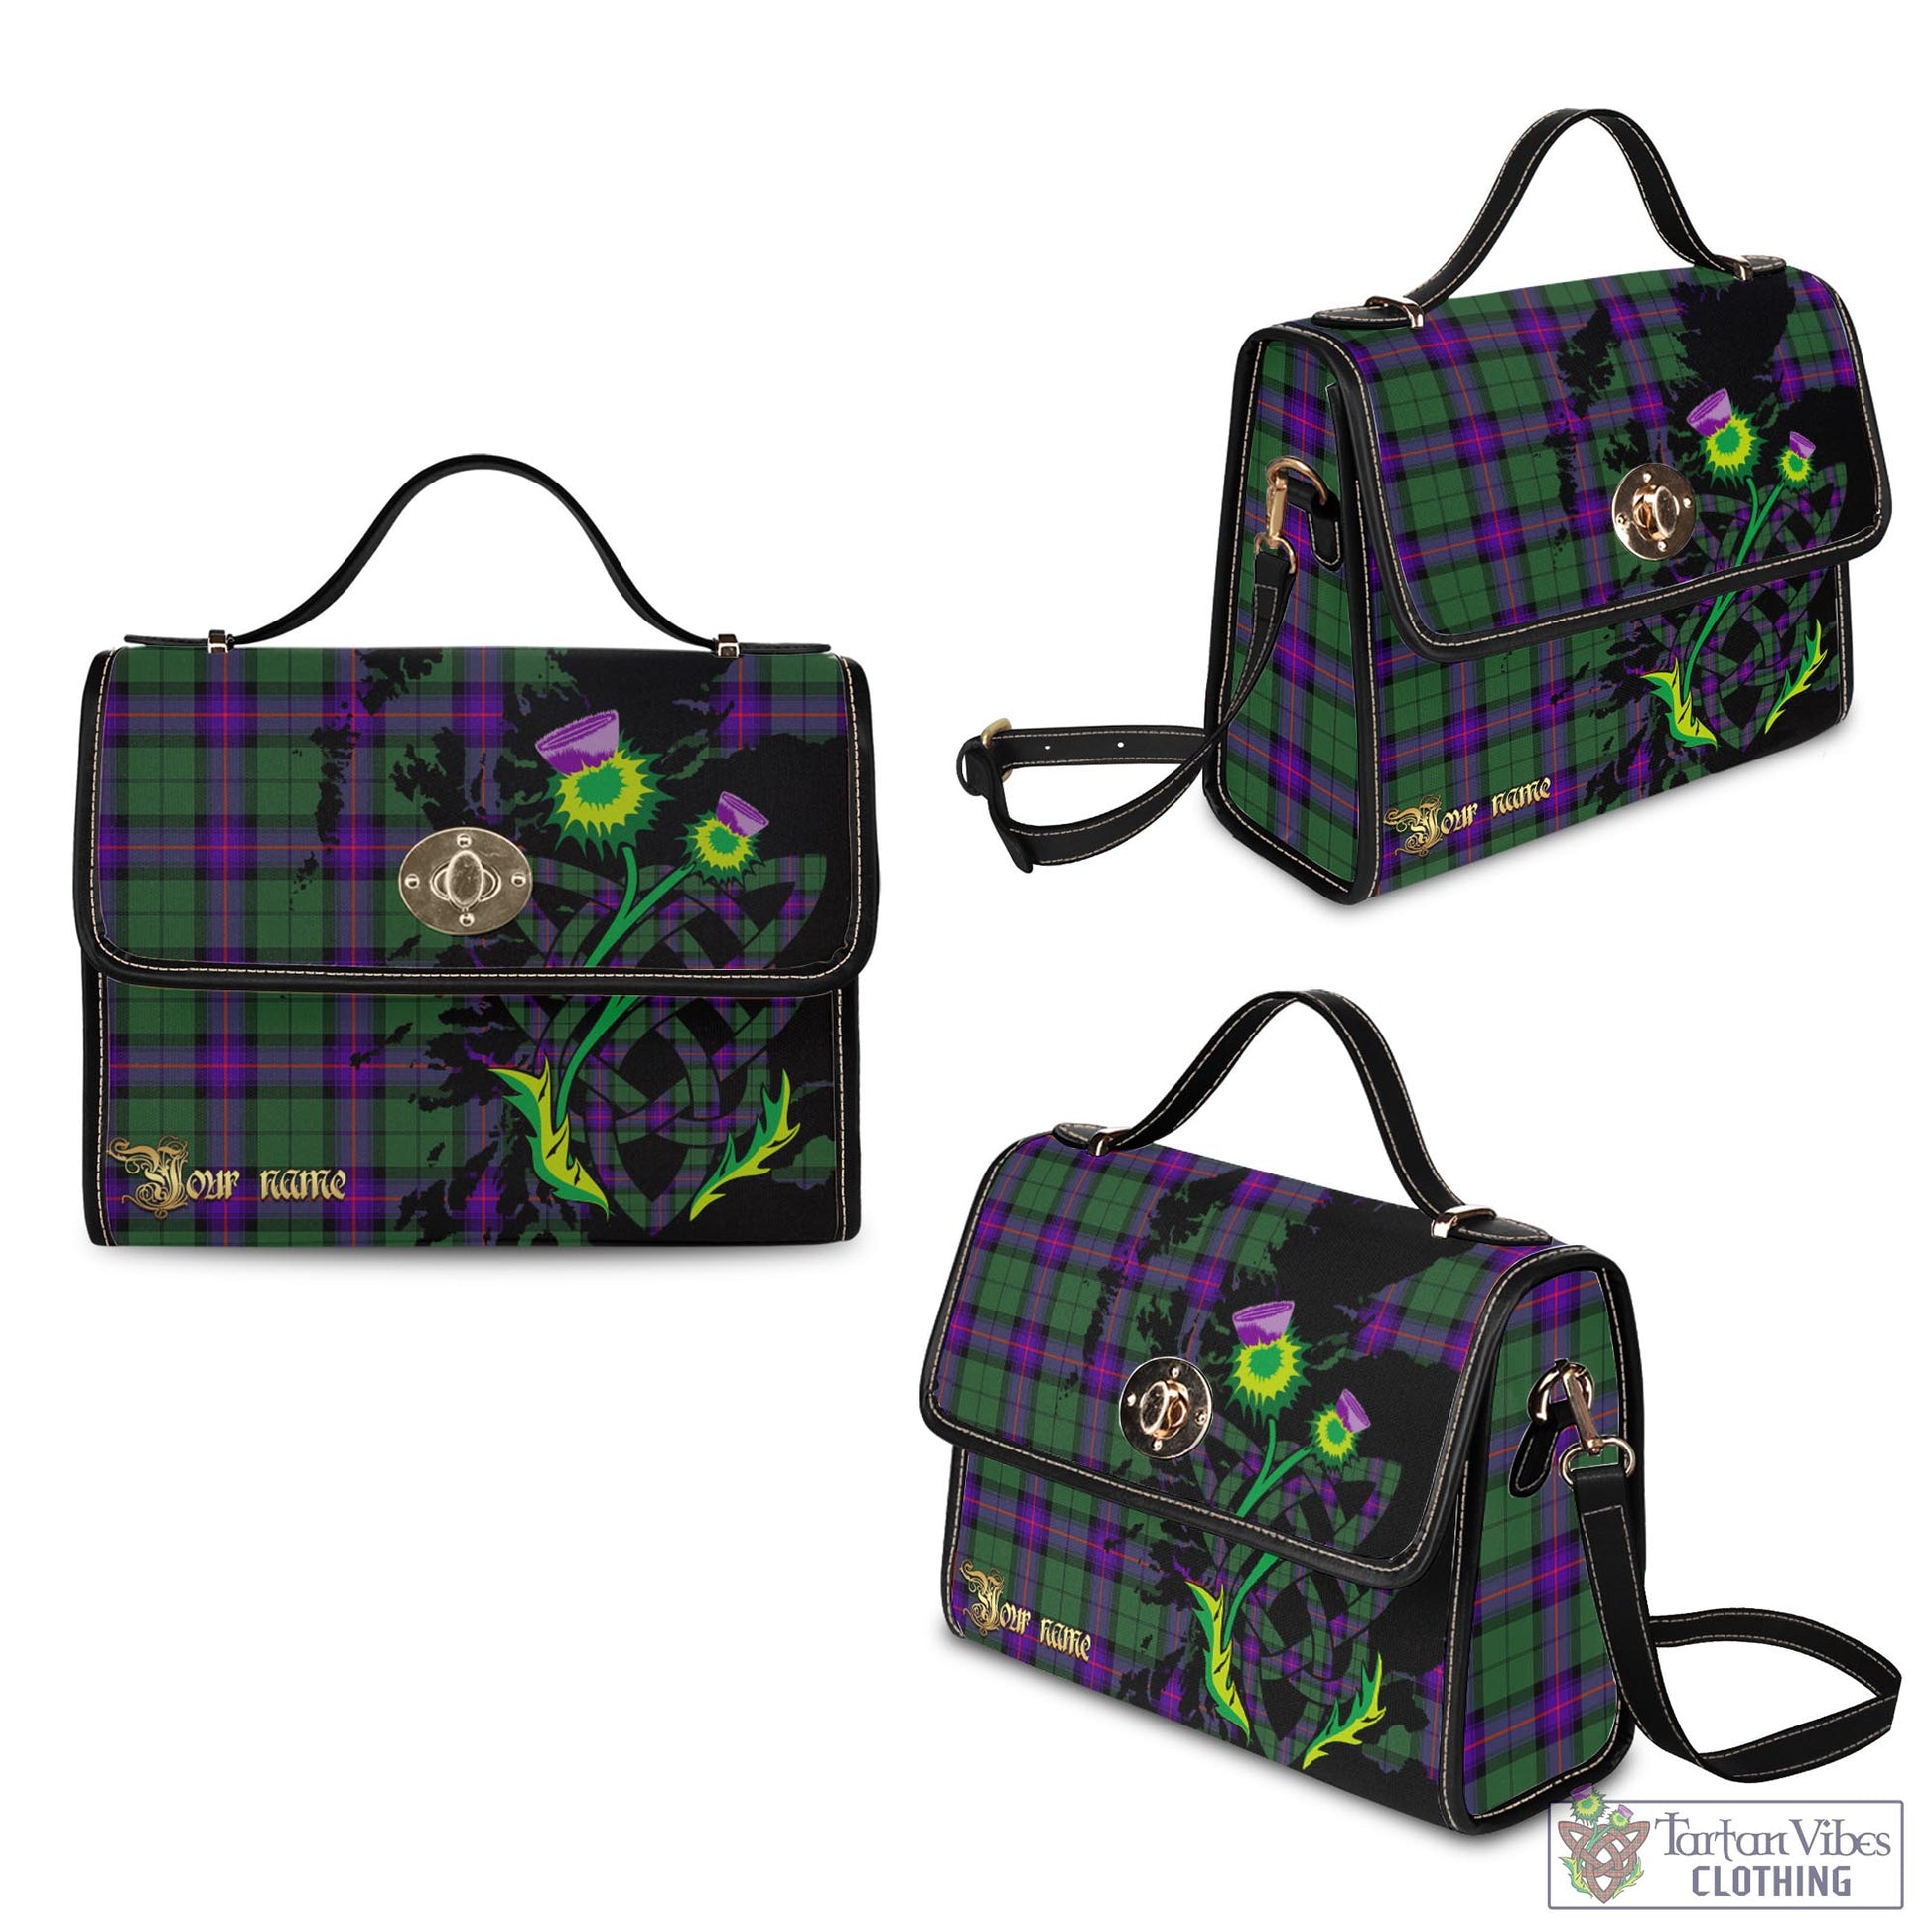 Tartan Vibes Clothing Armstrong Modern Tartan Waterproof Canvas Bag with Scotland Map and Thistle Celtic Accents